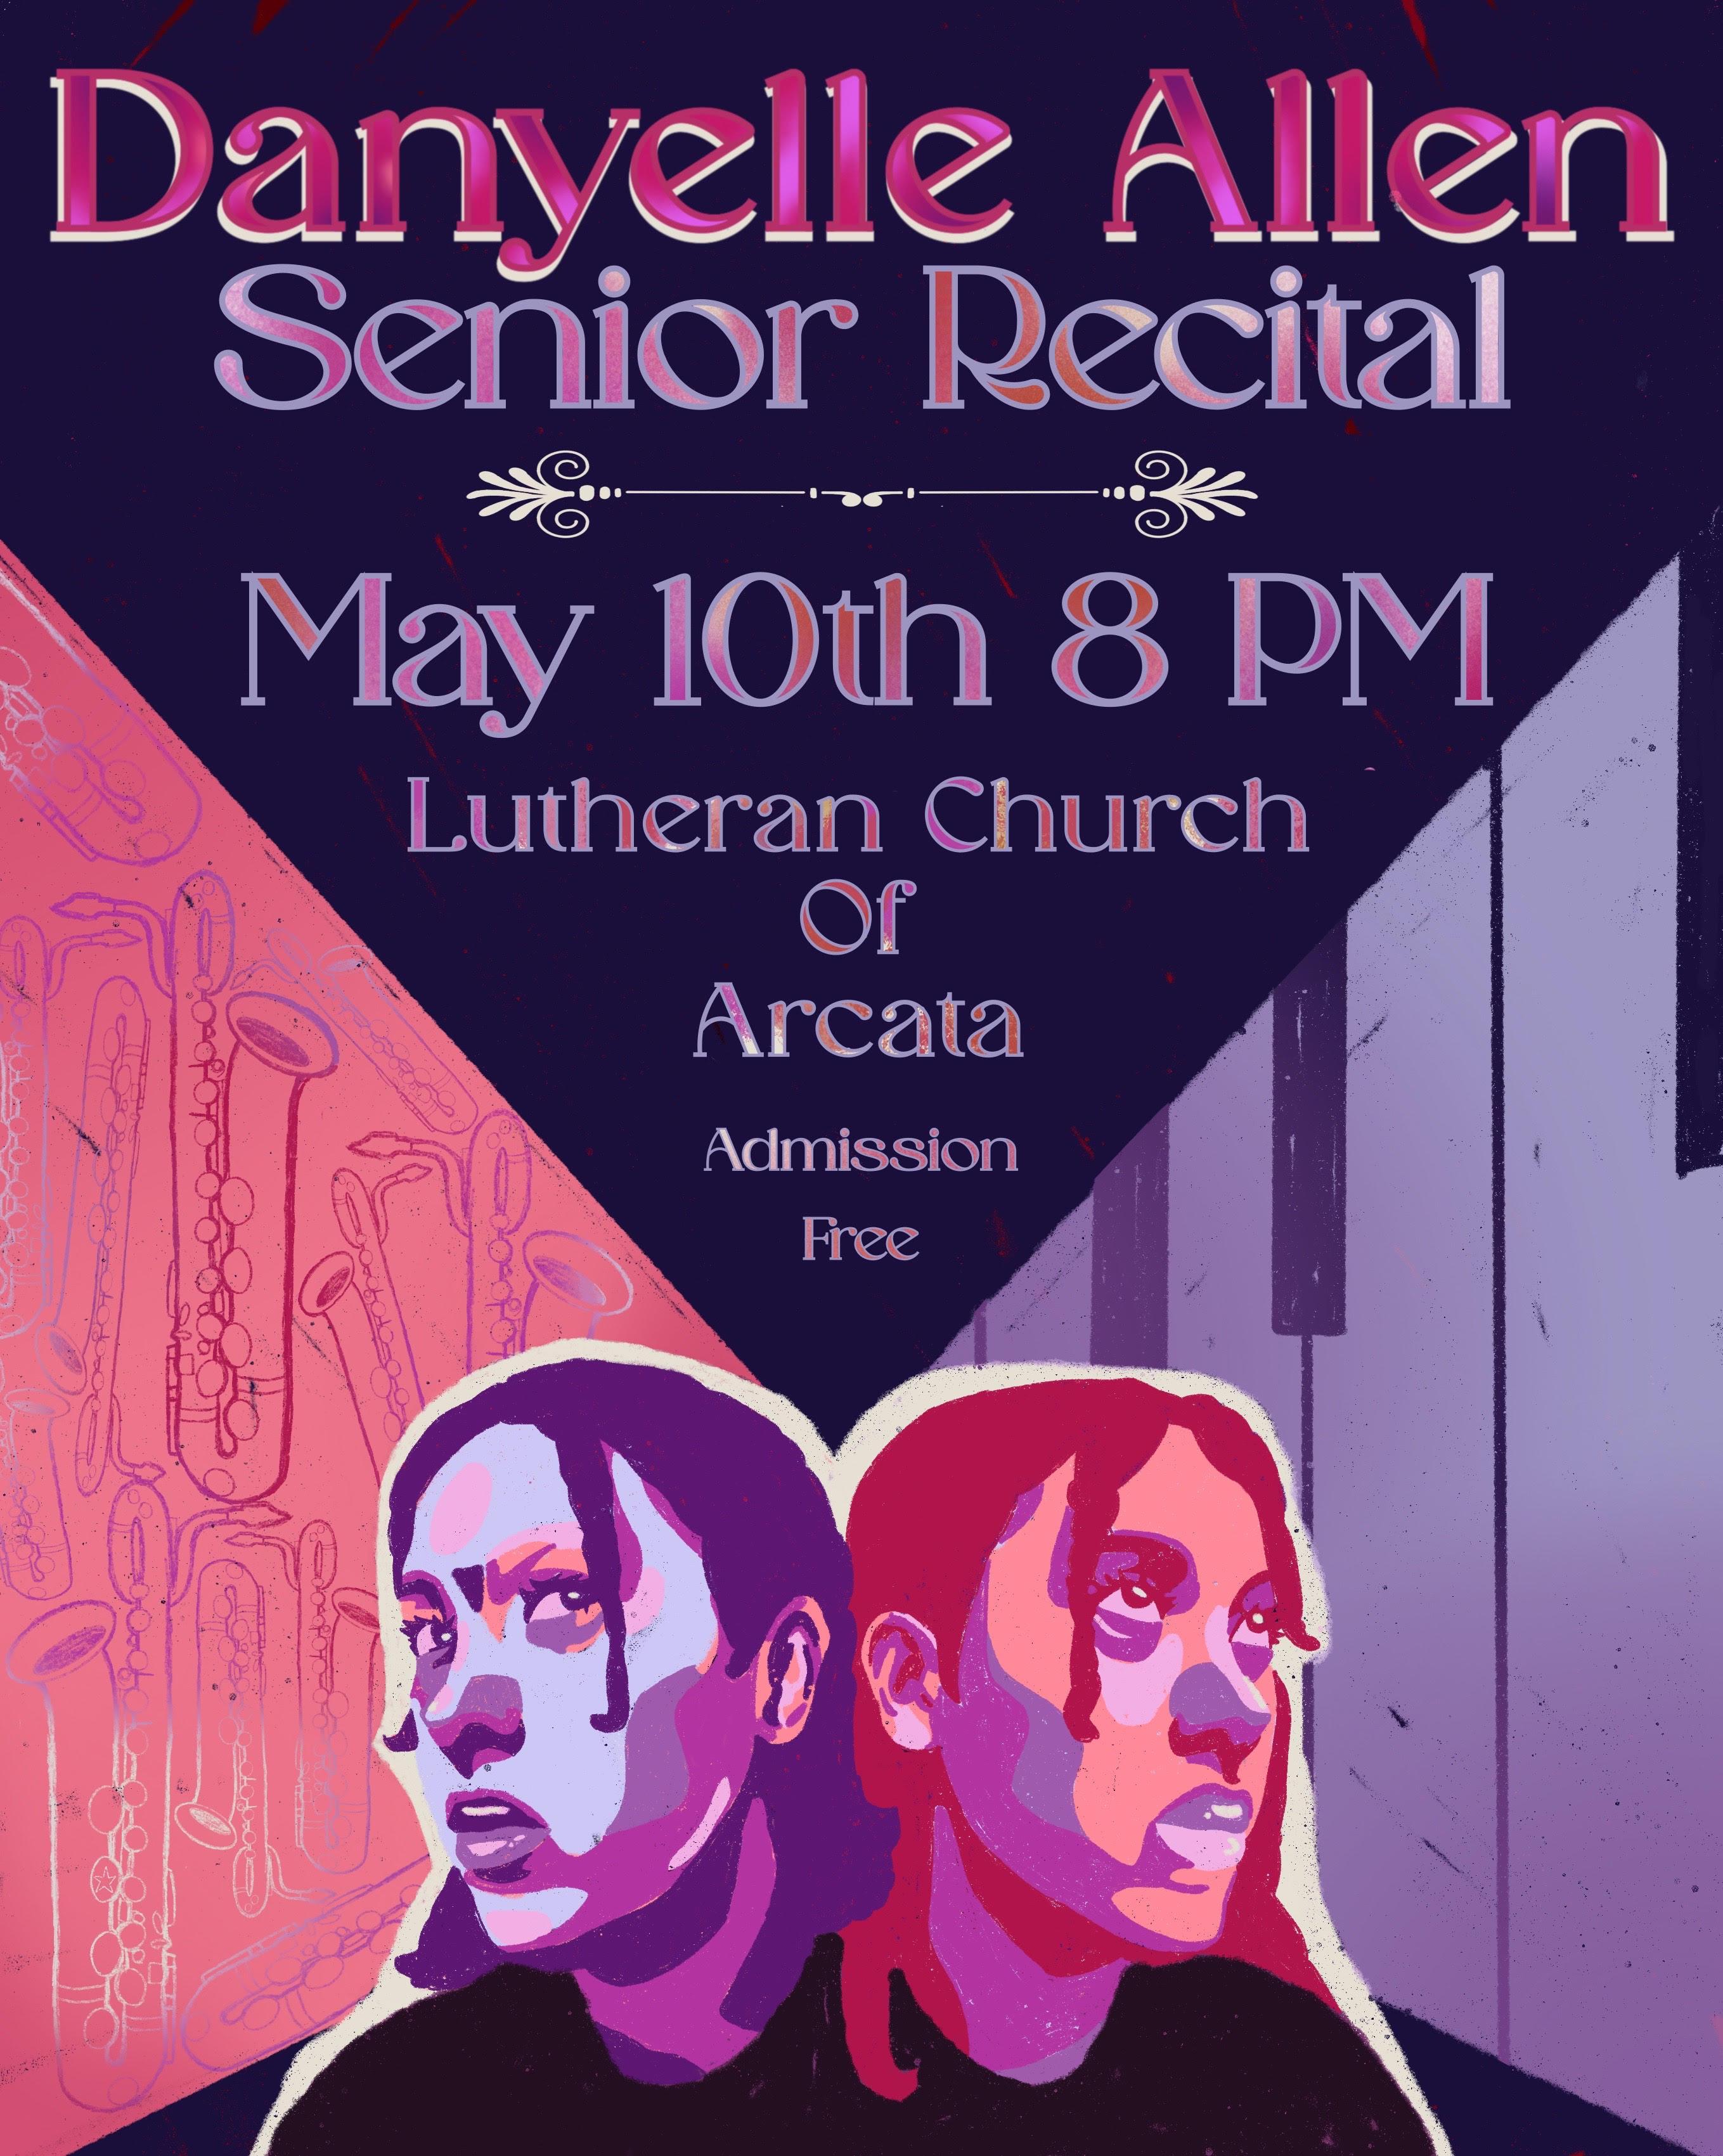 Danyelle Allen - Senior Recital Friday, May 10th at 8 PM at the Lutheran Church of Arcata - Free Admission